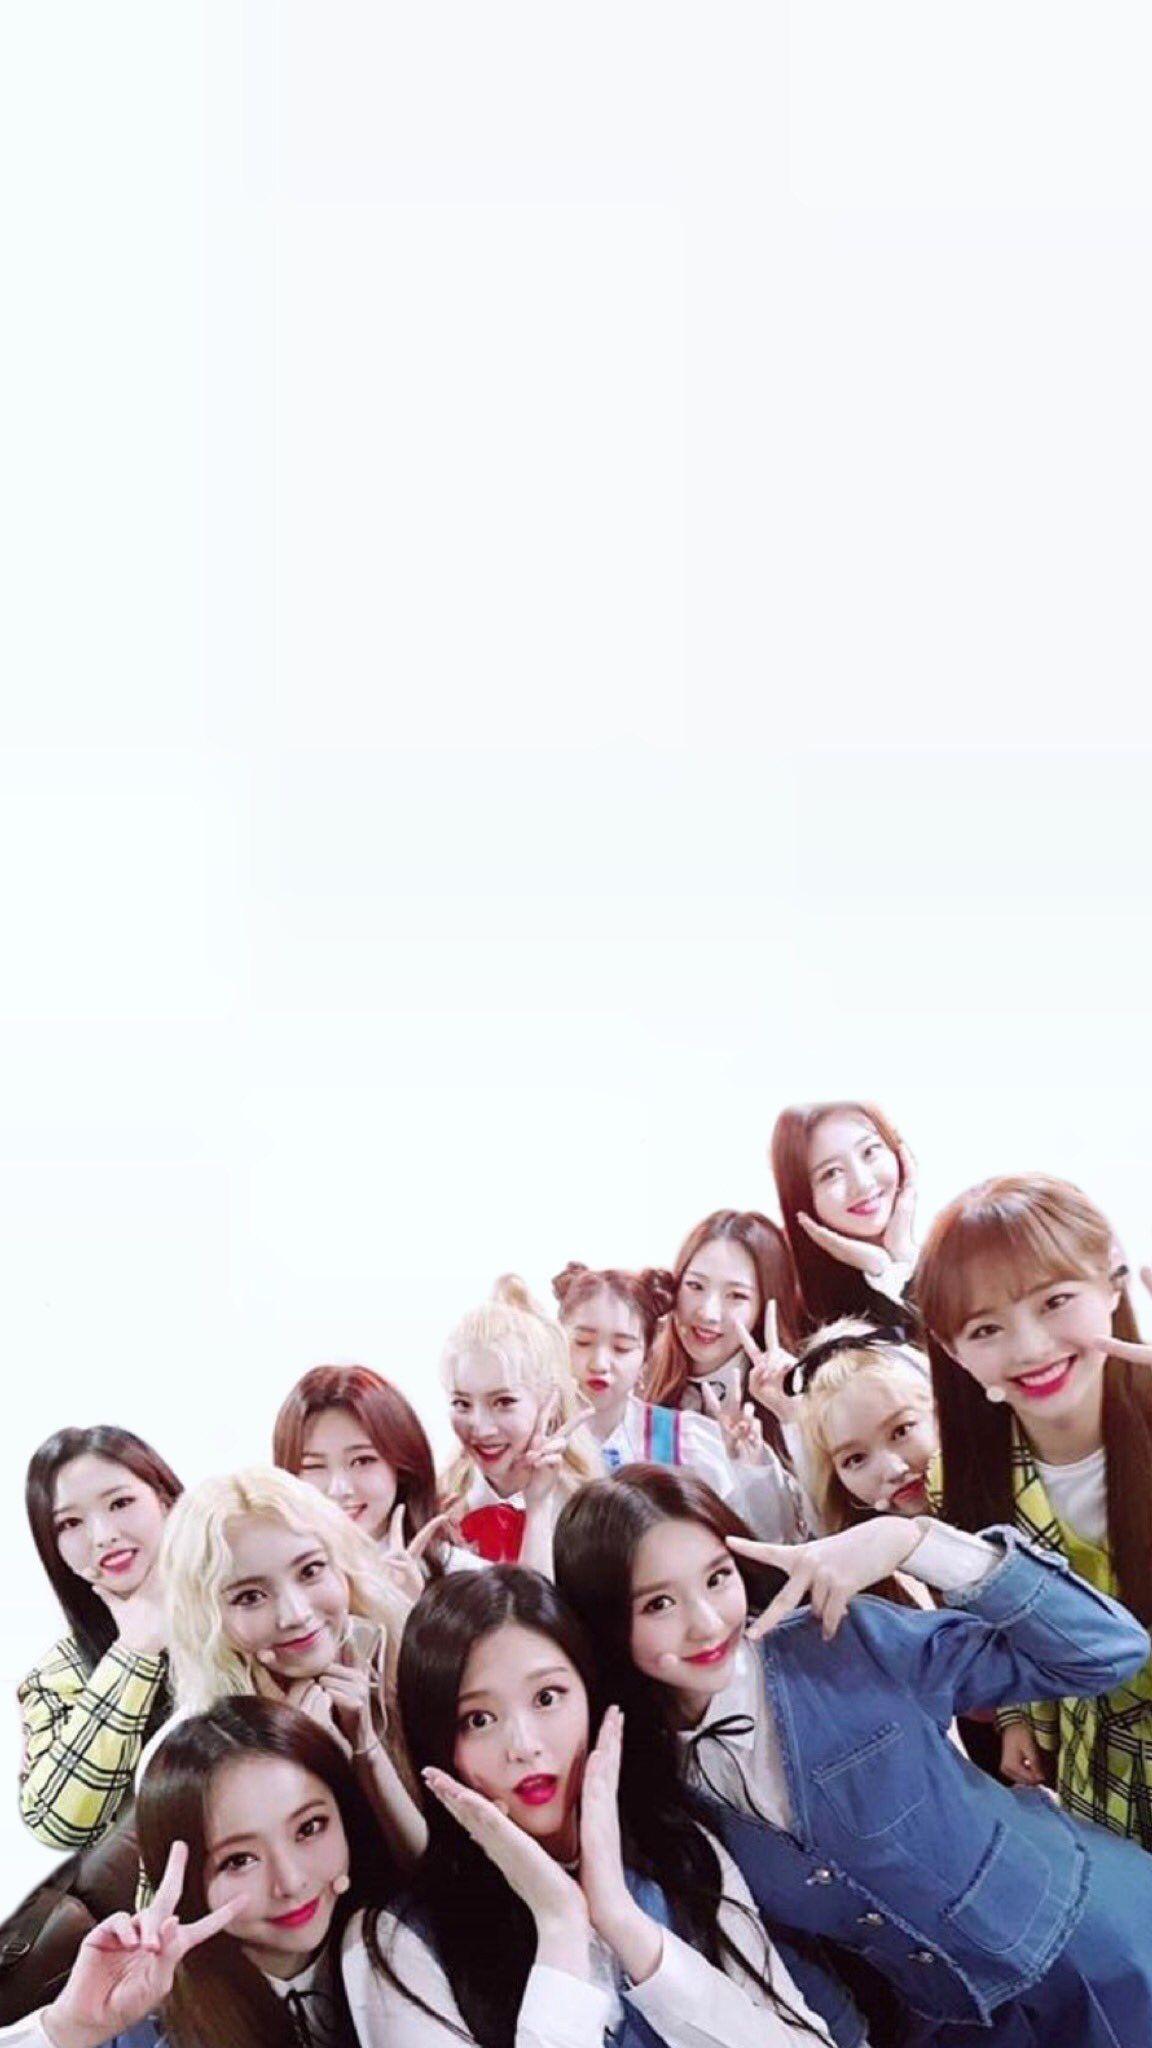 Loona for phone background. K pop. Couple photo, Phone